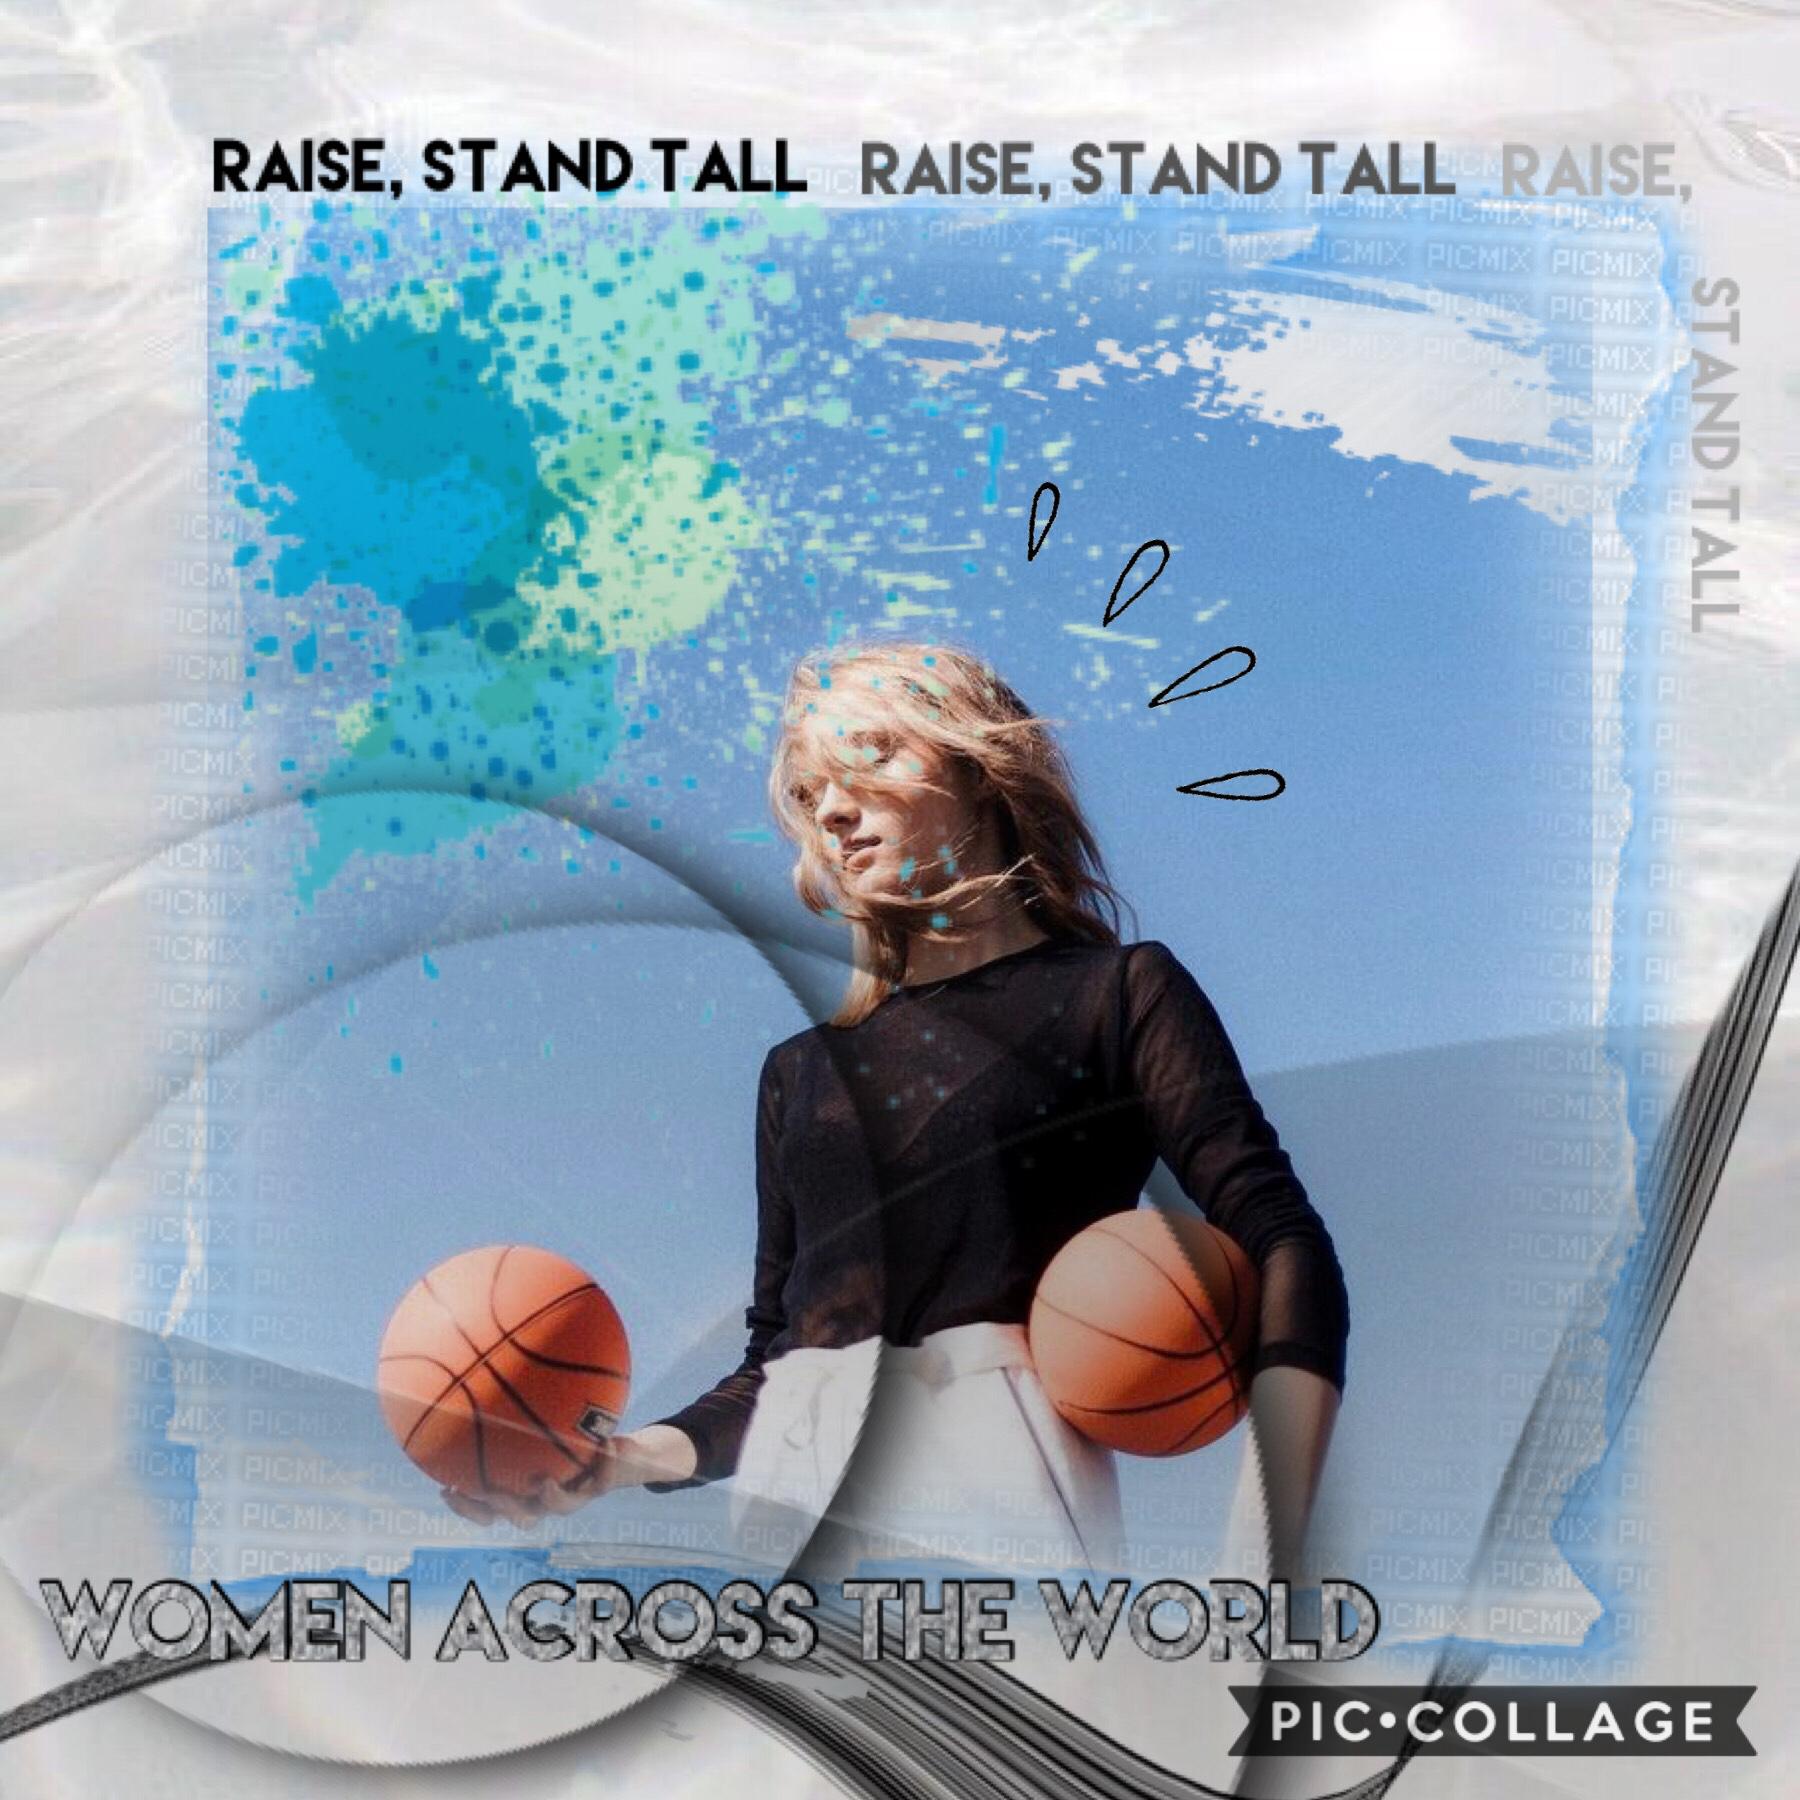 Tap

Women across the world raise and stand tall!

Happy international women’s day 